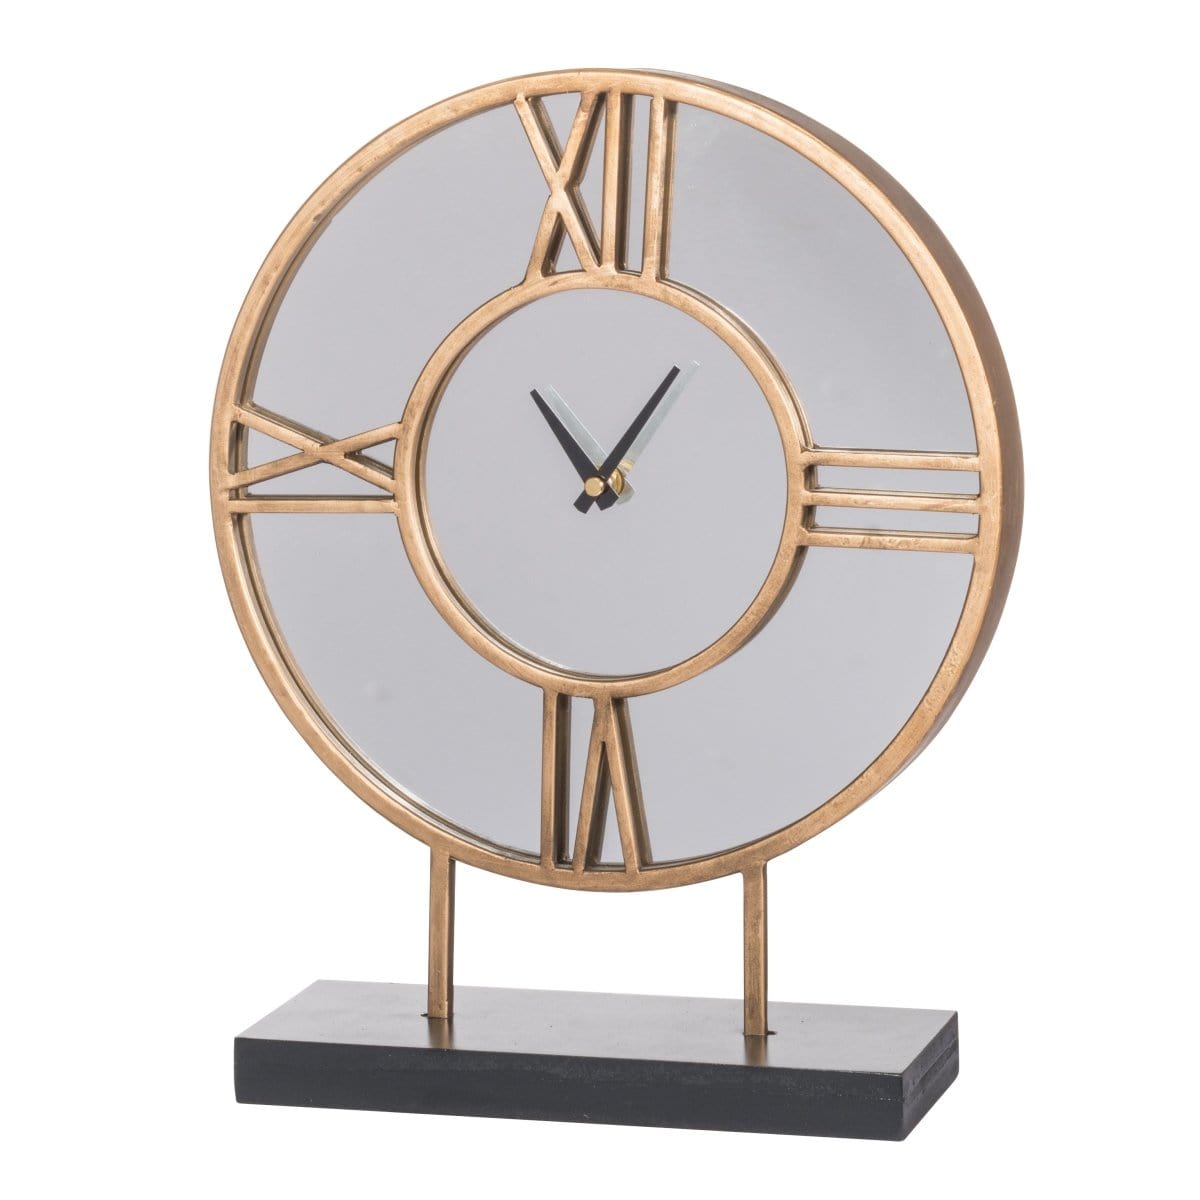 Clock - Kenzo Table Clock (AB-DF43492-DS) picket and rail